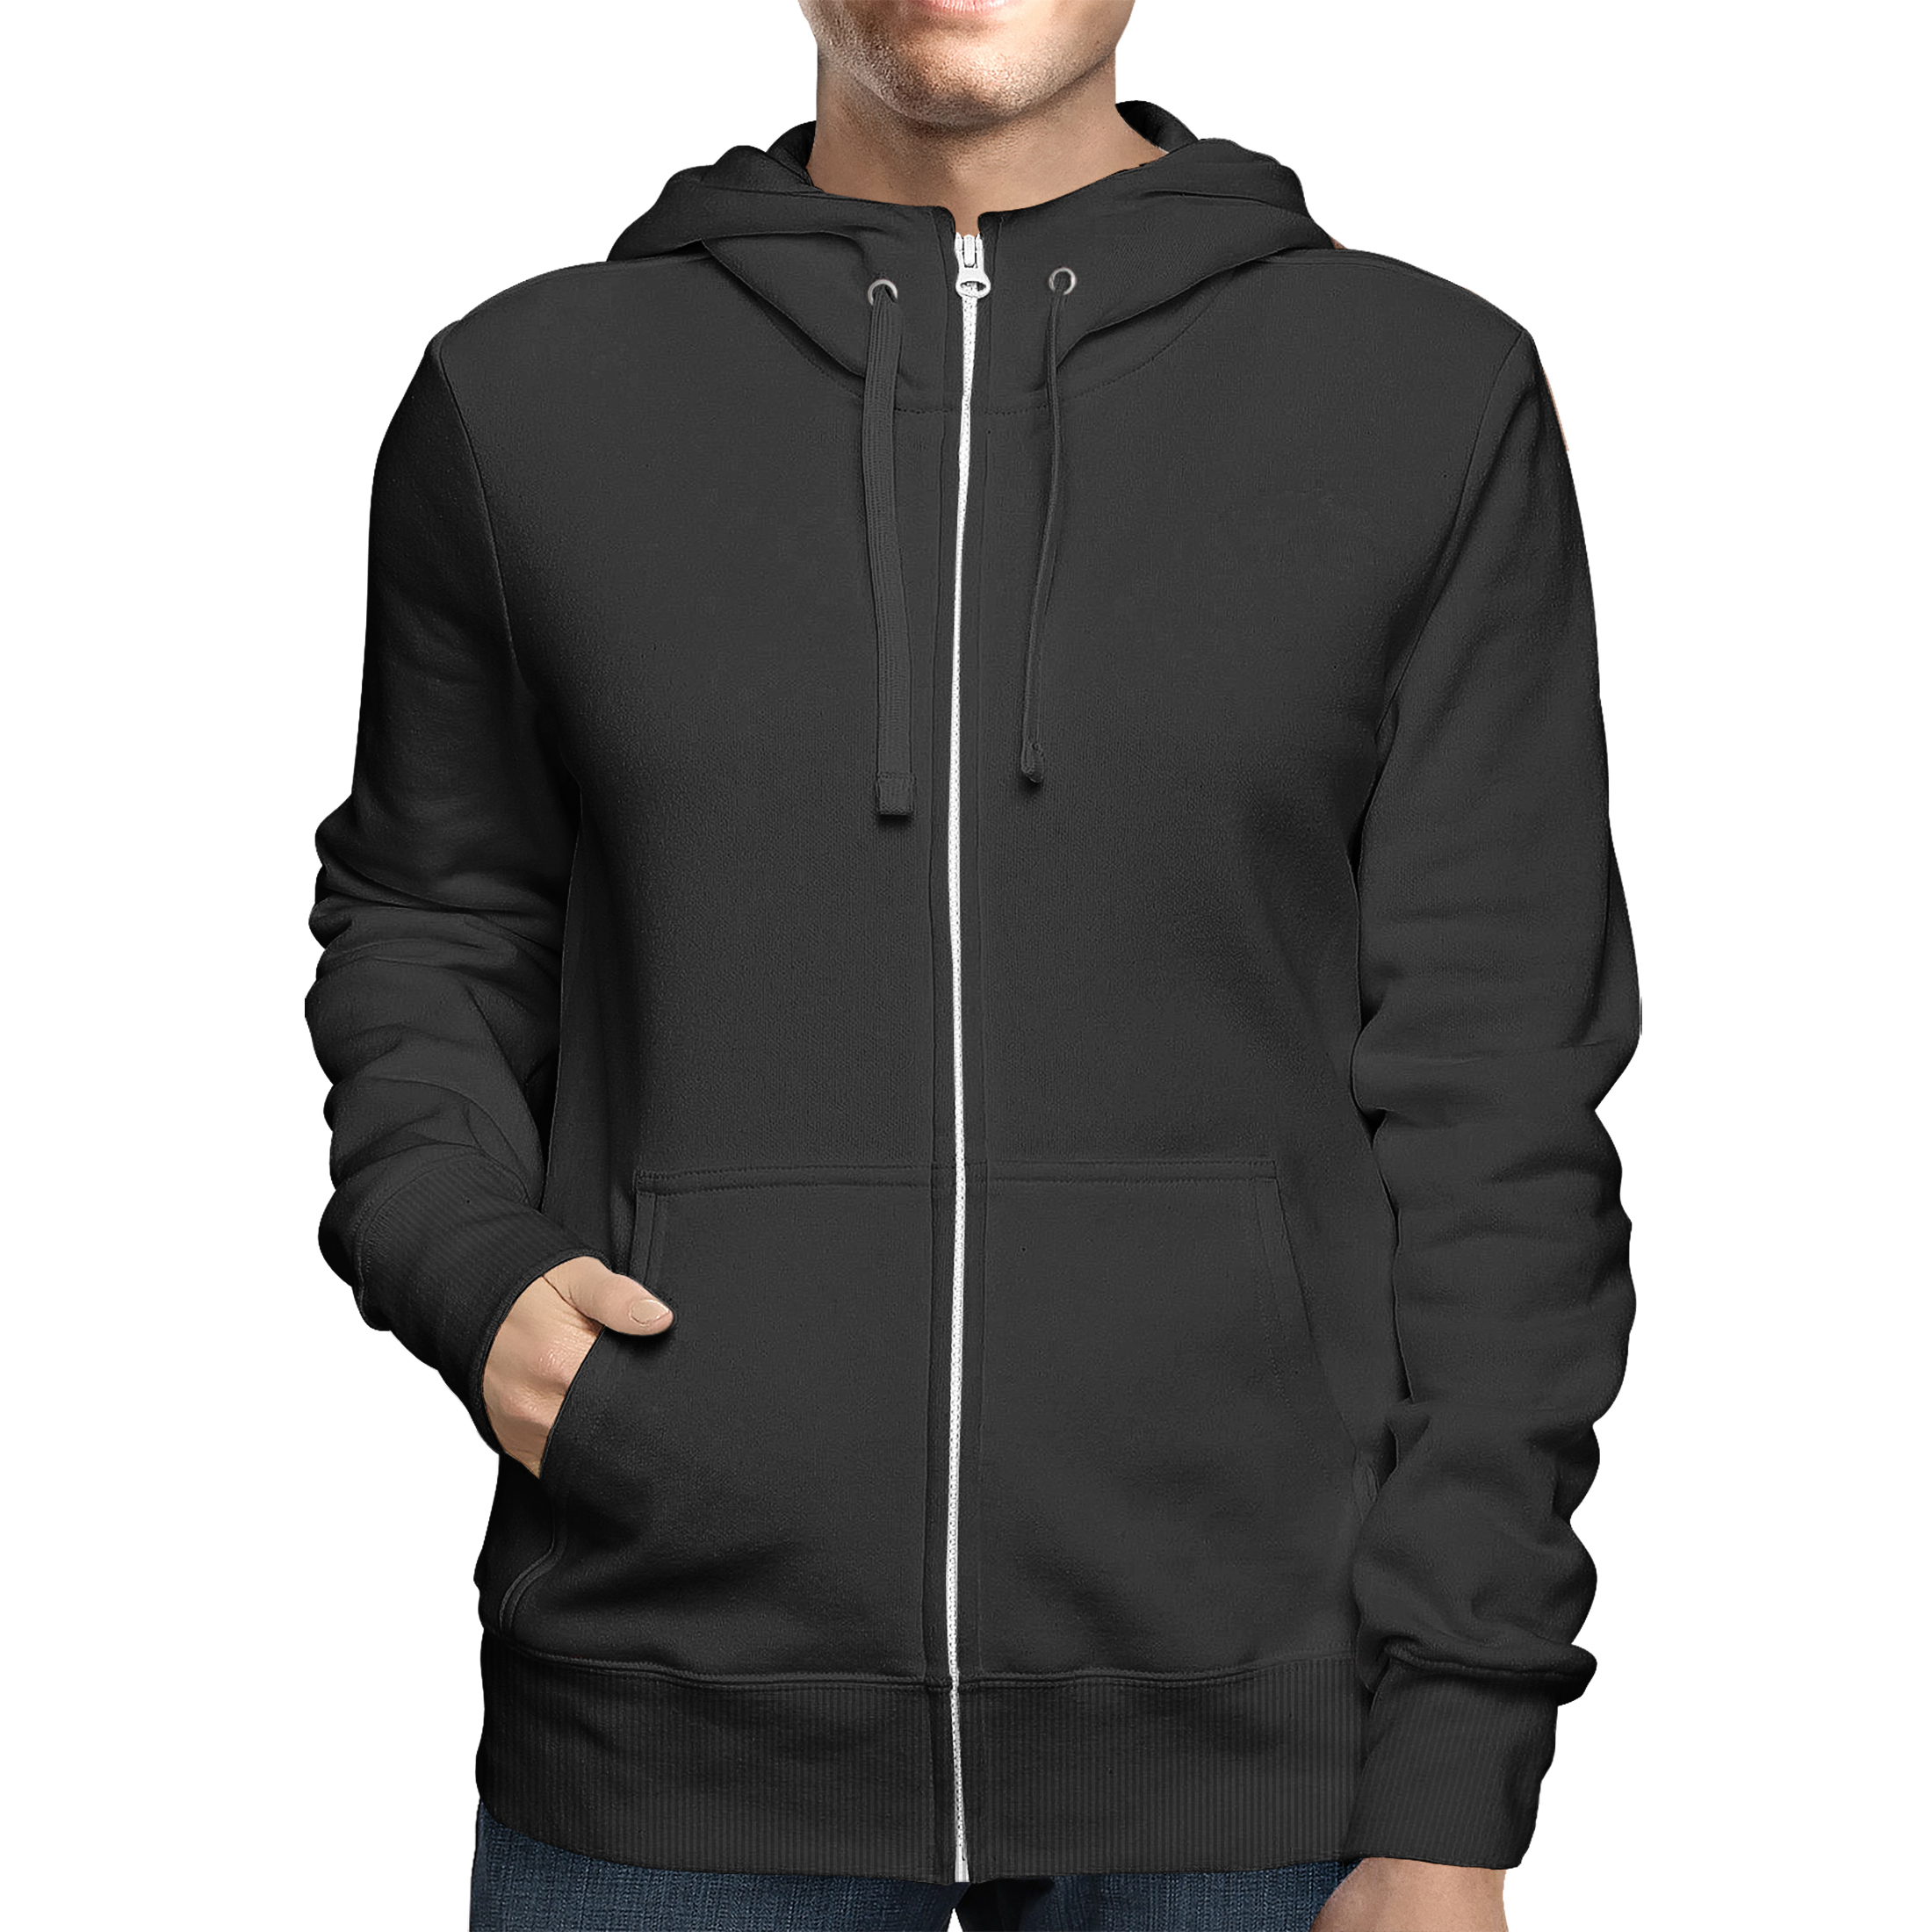 2-Pack: Men's Full Zip Up Fleece-Lined Hoodie Sweatshirt (Big & Tall Size Available) - Black, 2x-large